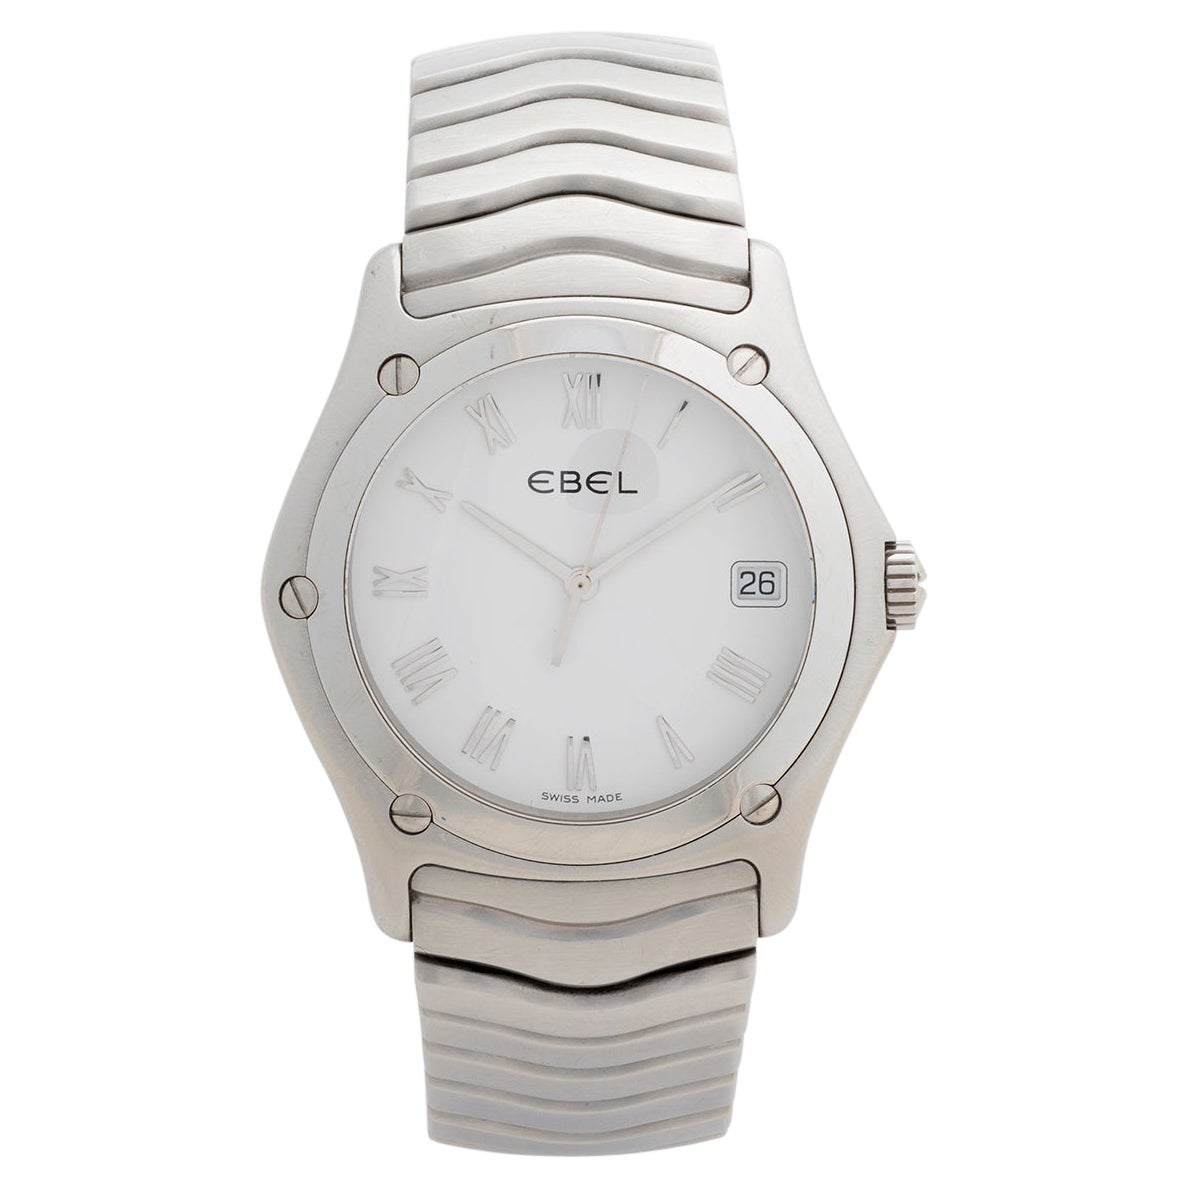 Ebel Classic Wave Gents Size, Ref E9187F41. Excellent Condition, Box & Papers.